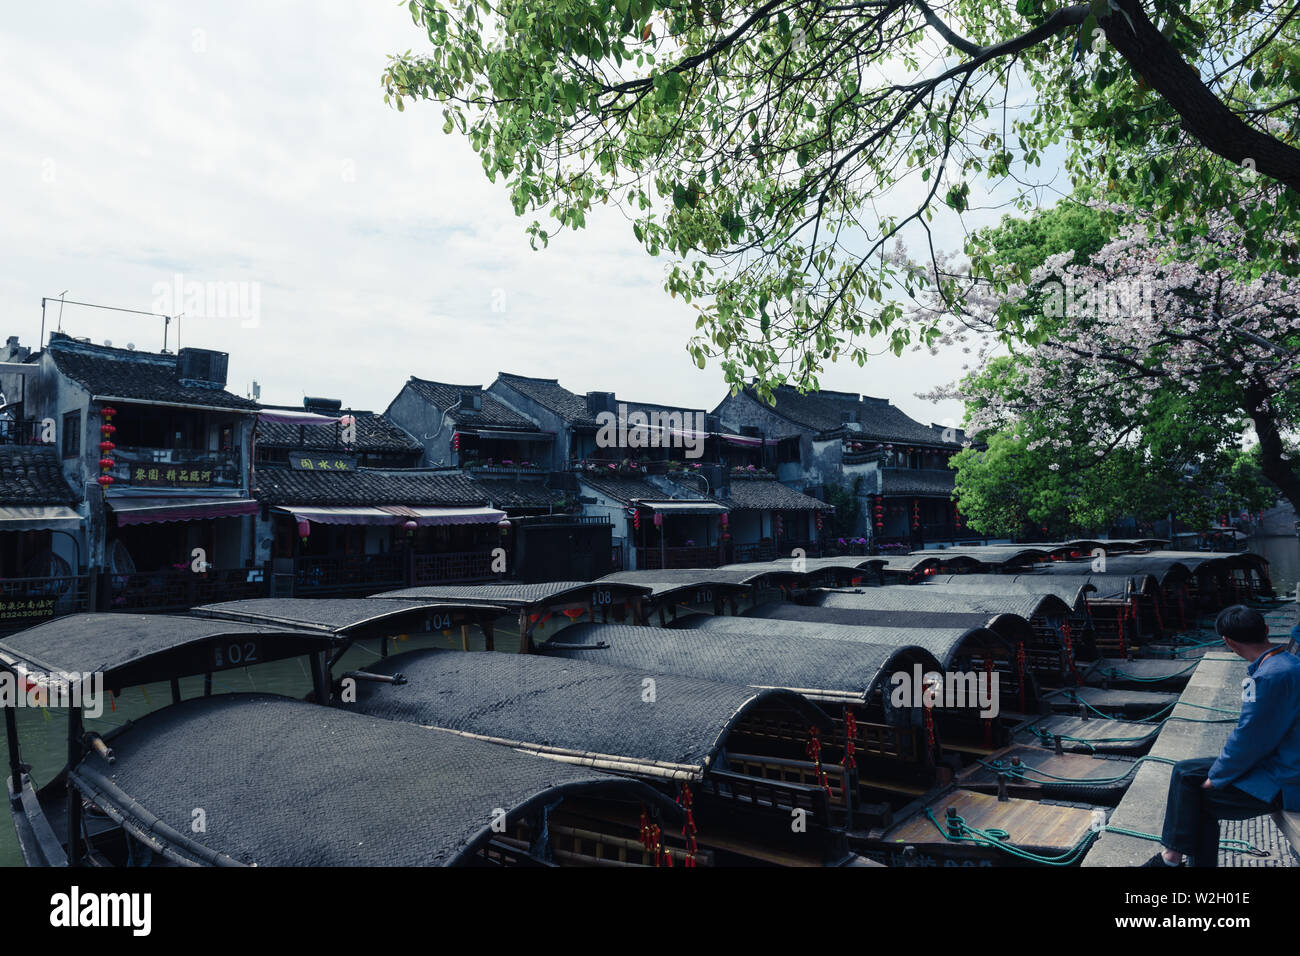 XITANG - Mar 31,2019: Tourist boats on the water canals of Xitang Town in Zhejiang Province, China Stock Photo